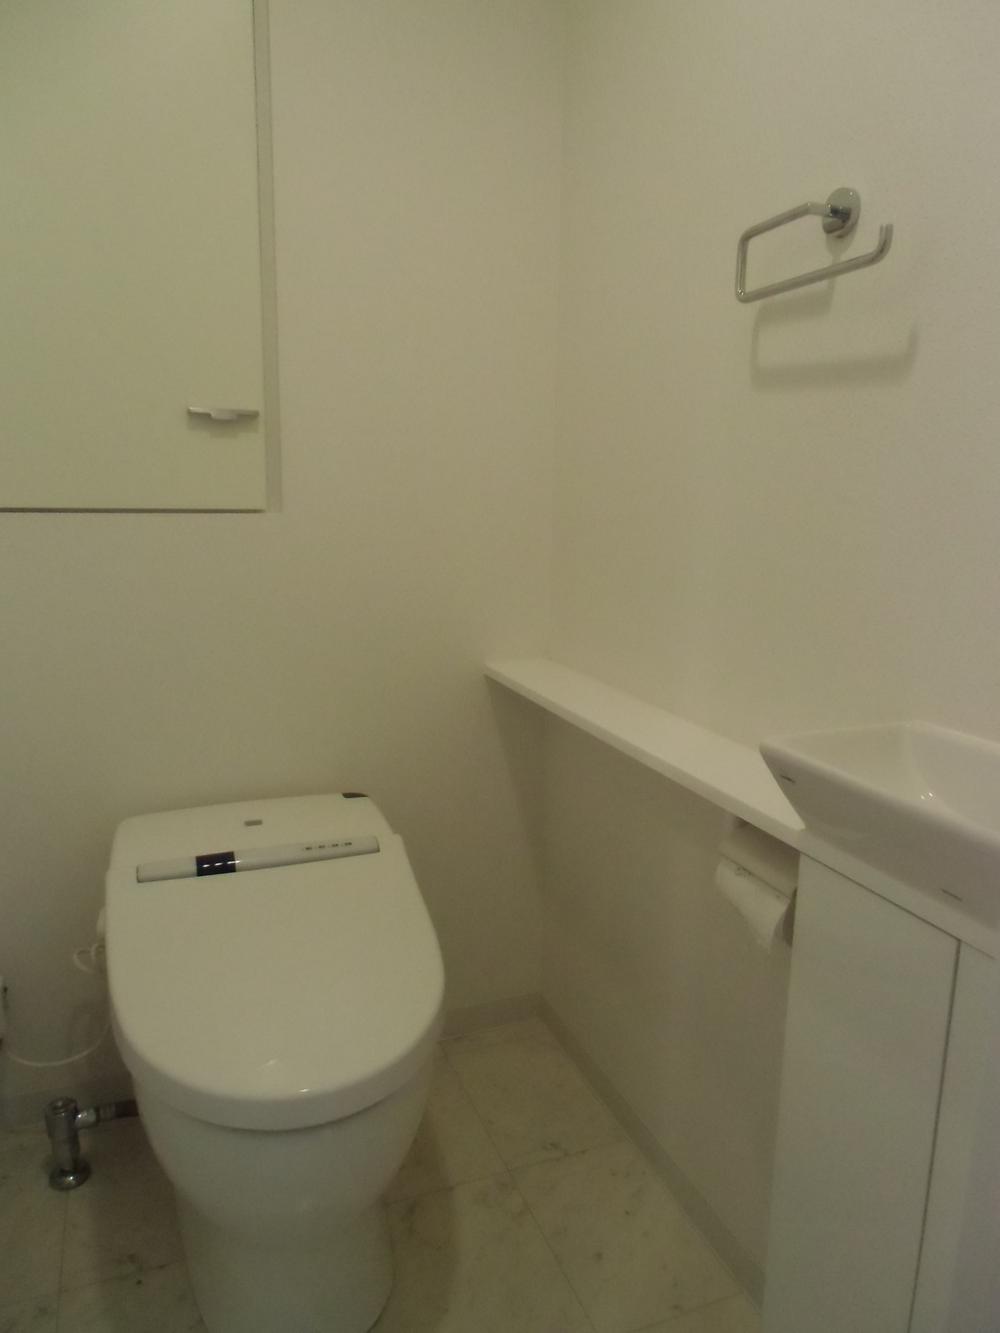 Other introspection. Toilet space with a space in with hand-wash counter